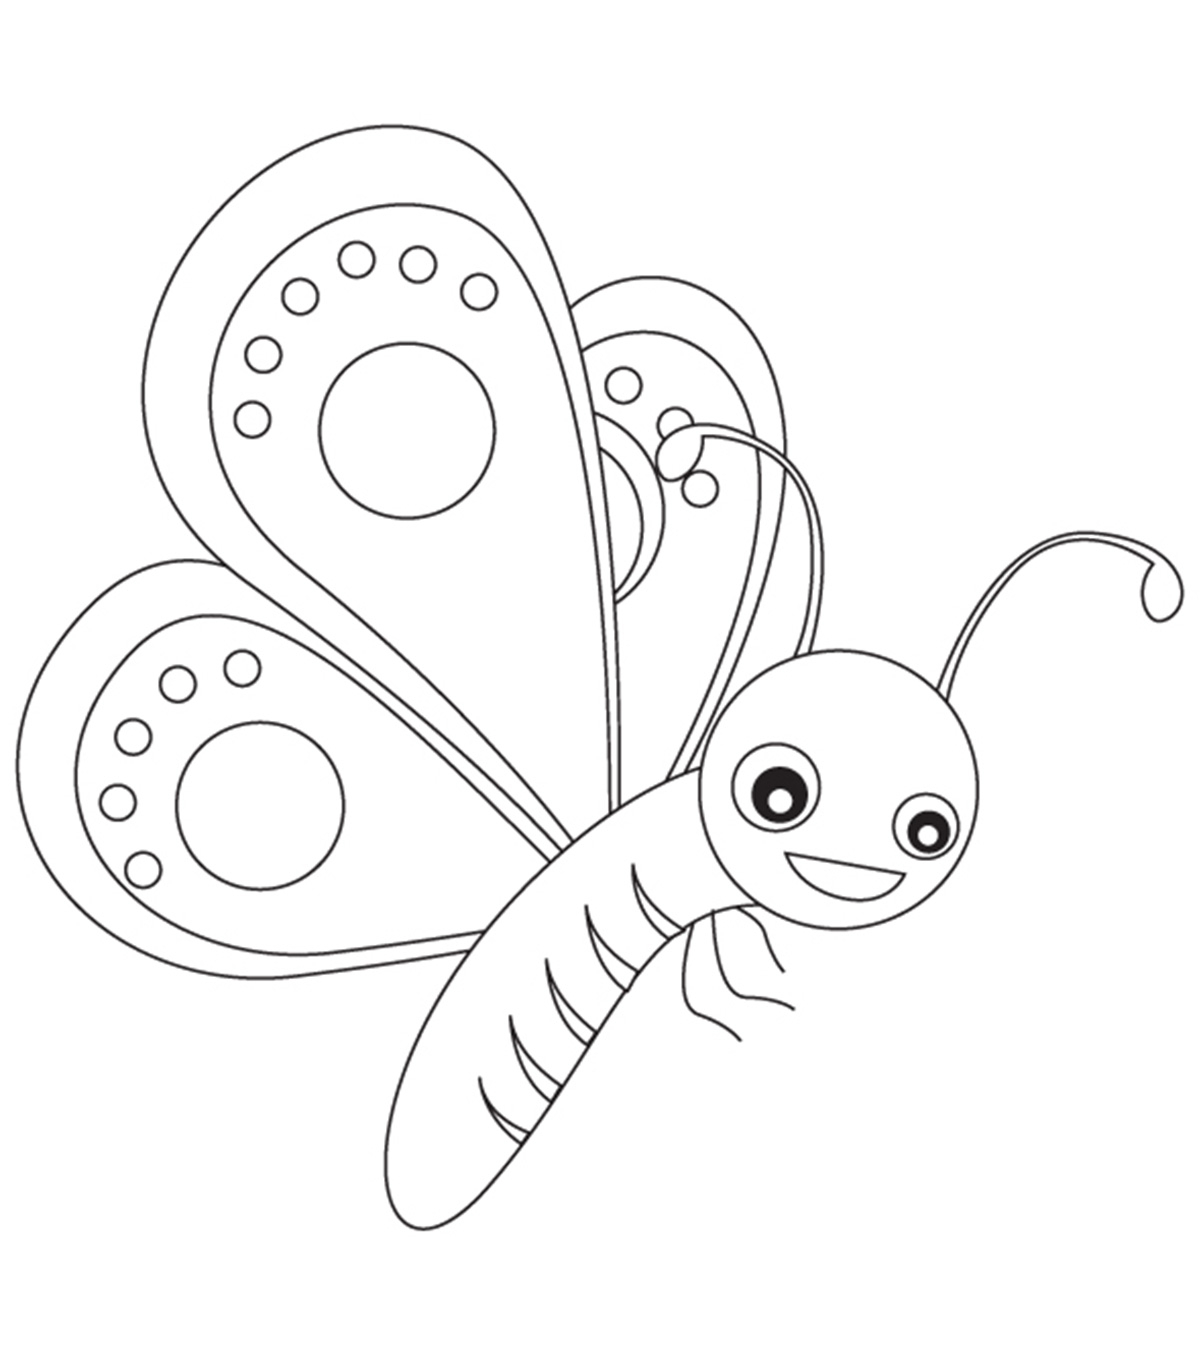 Butterfly Outline Coloring Page Top 50 Free Printable Butterfly Coloring Pages Online